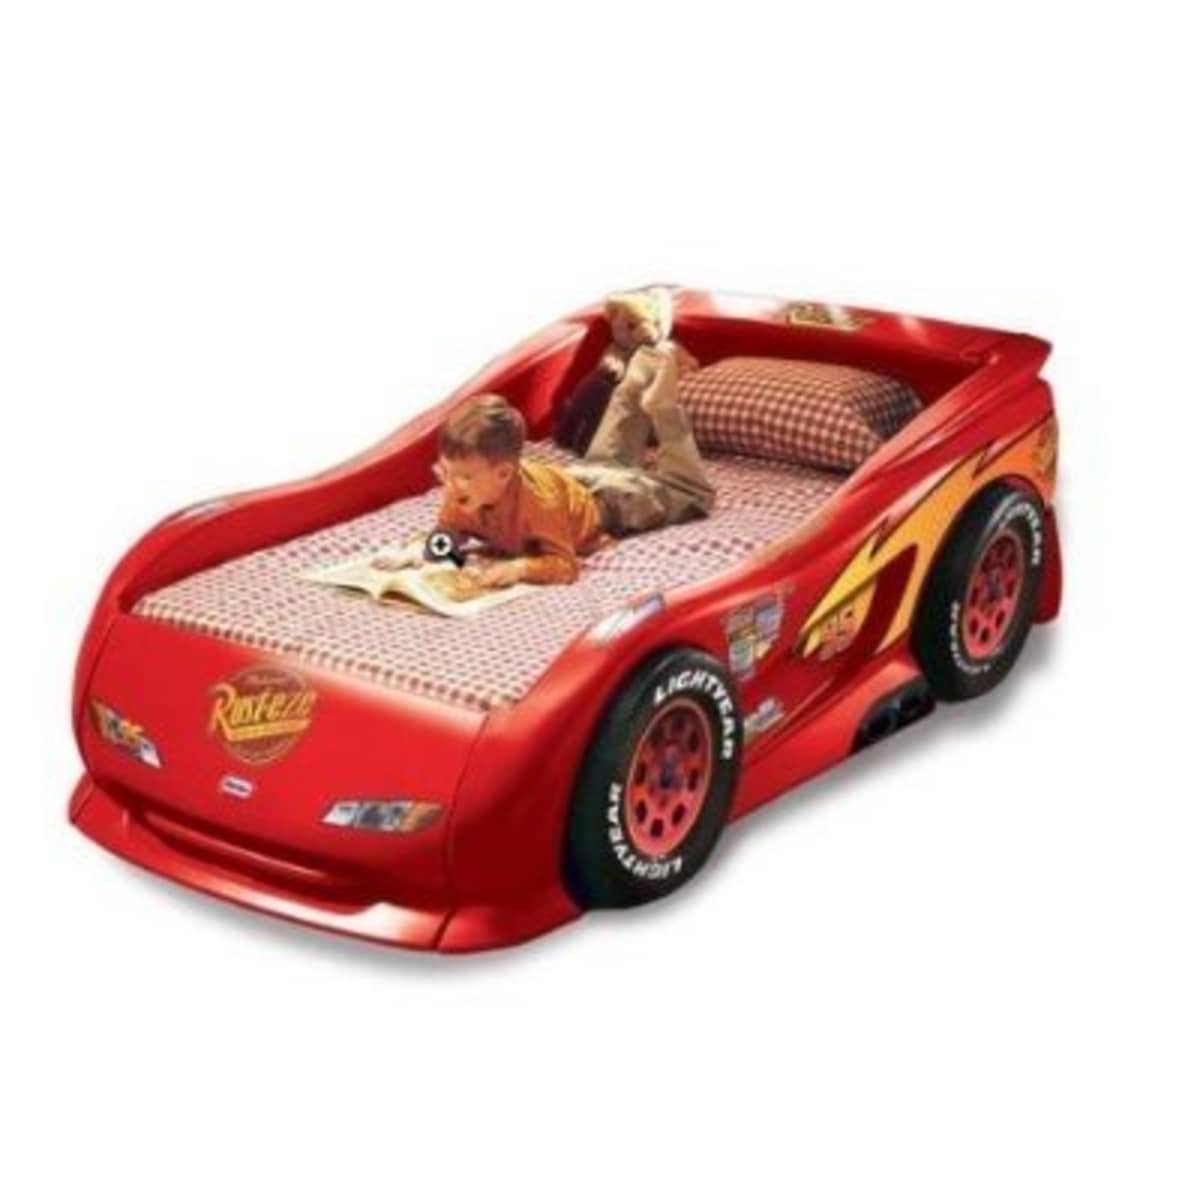 Little Tikes car Bed